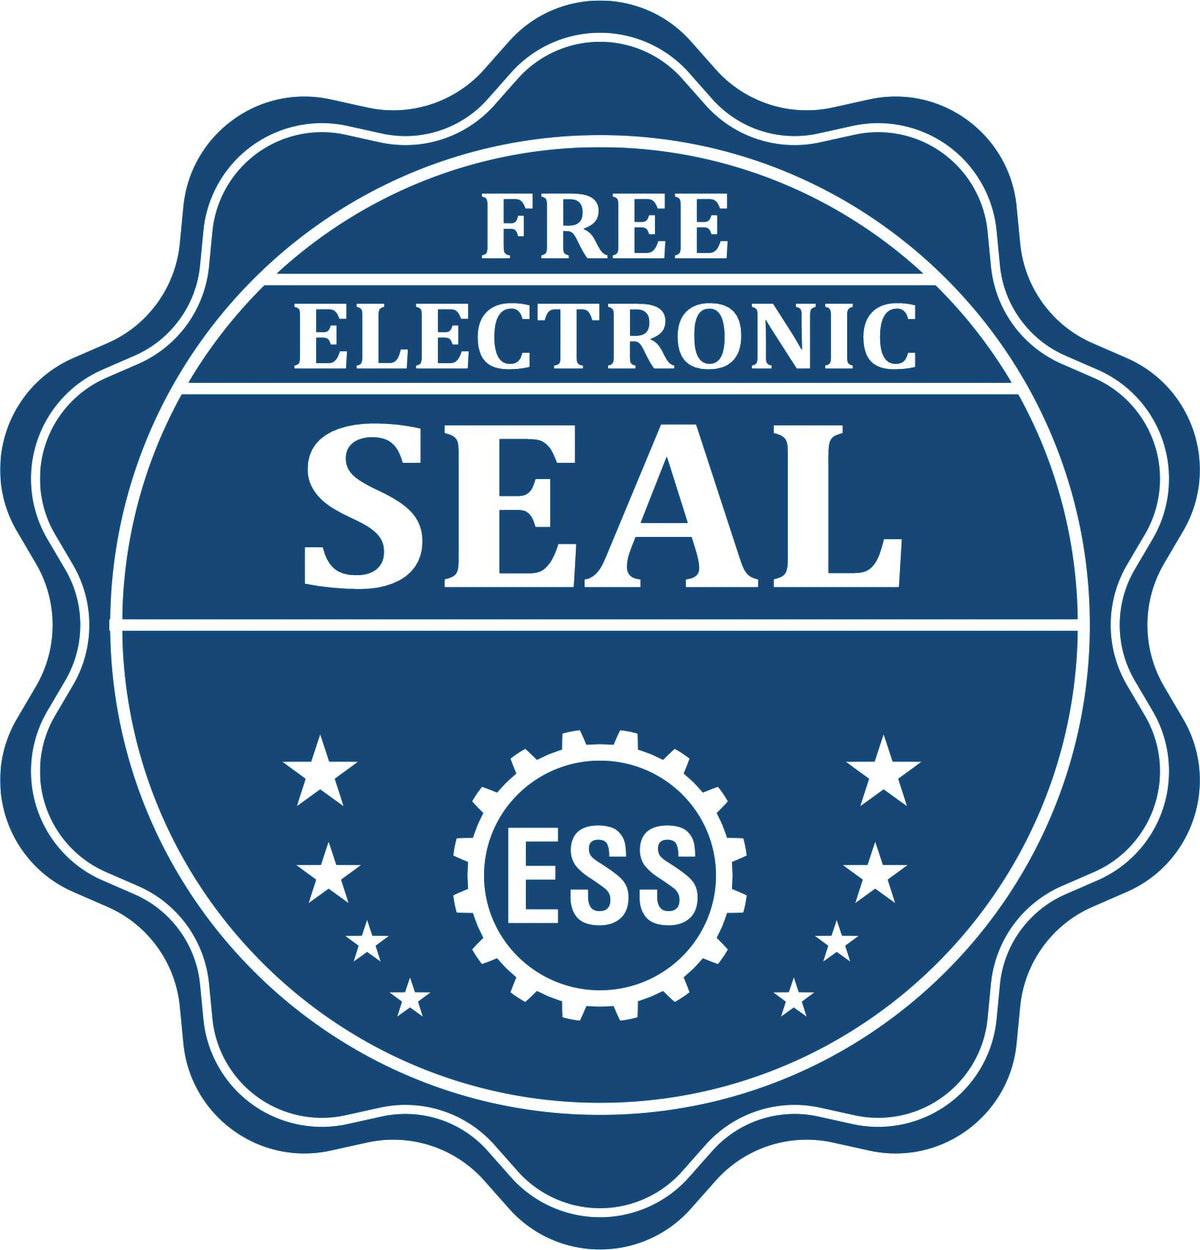 A badge showing a free electronic seal for the Long Reach Guam Geology Seal with stars and the ESS gear on the emblem.